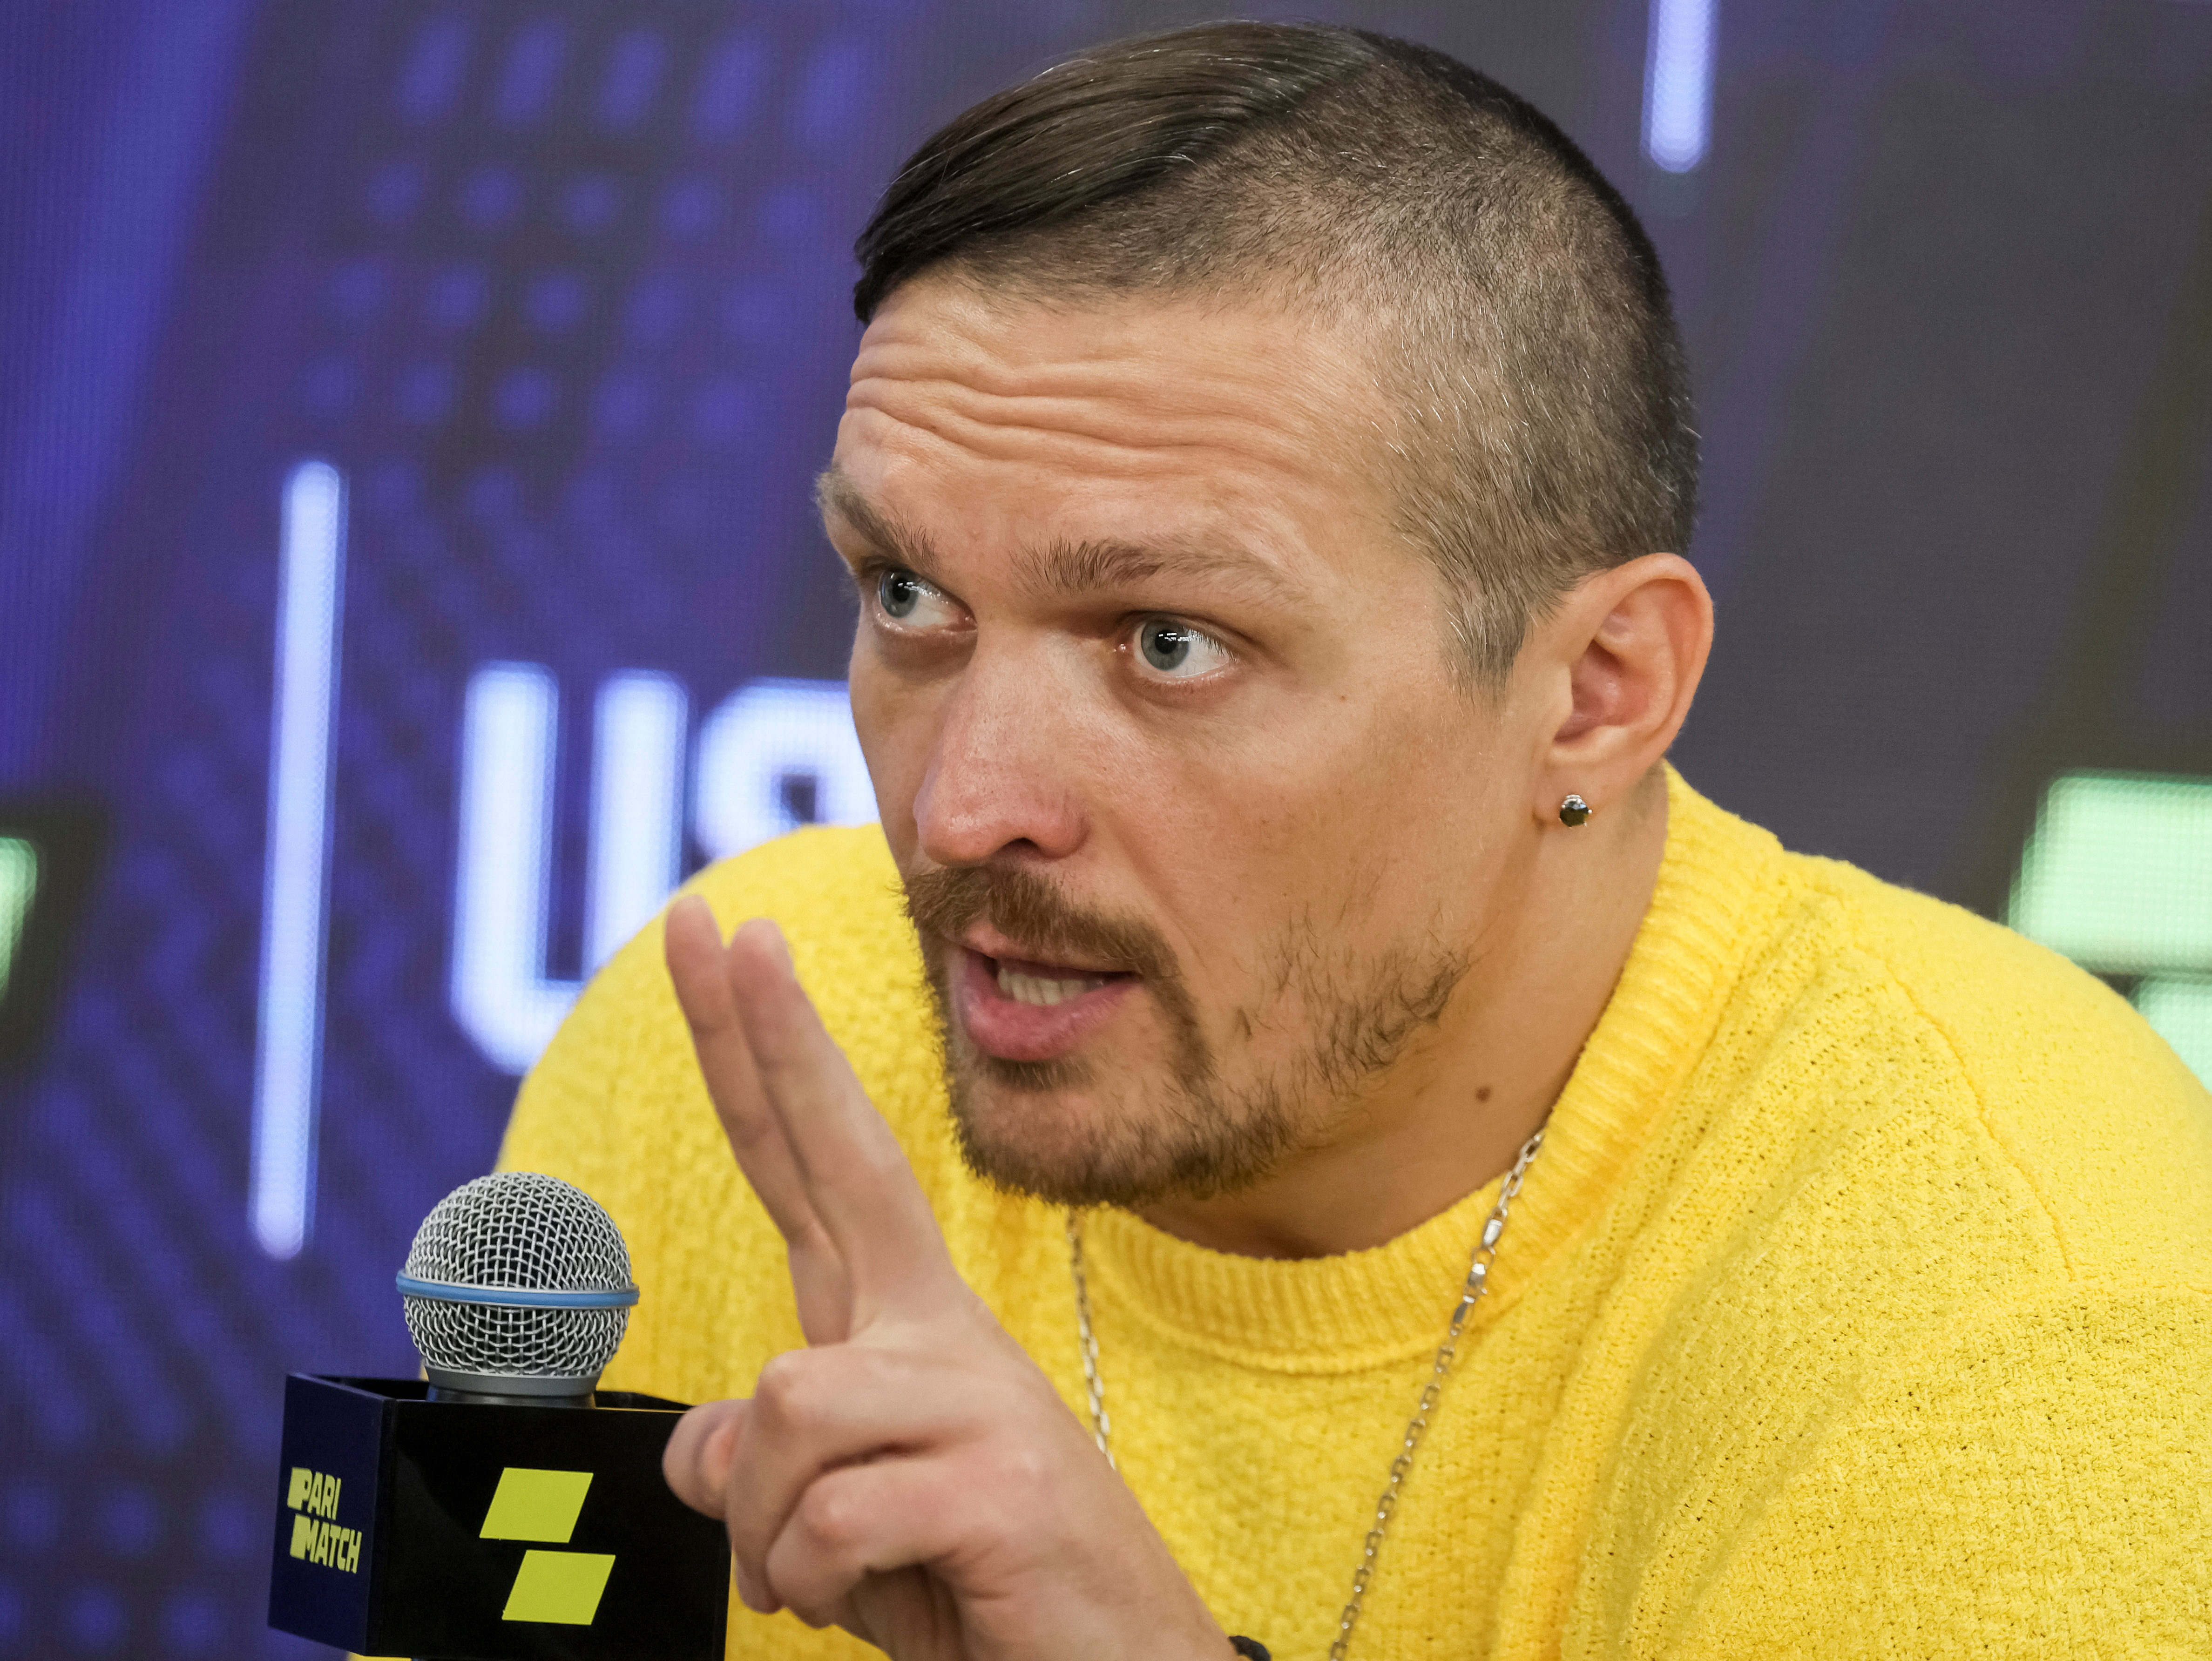 Ukraine's unified world heavyweight boxing champion Usyk attends a news conference in Kyiv